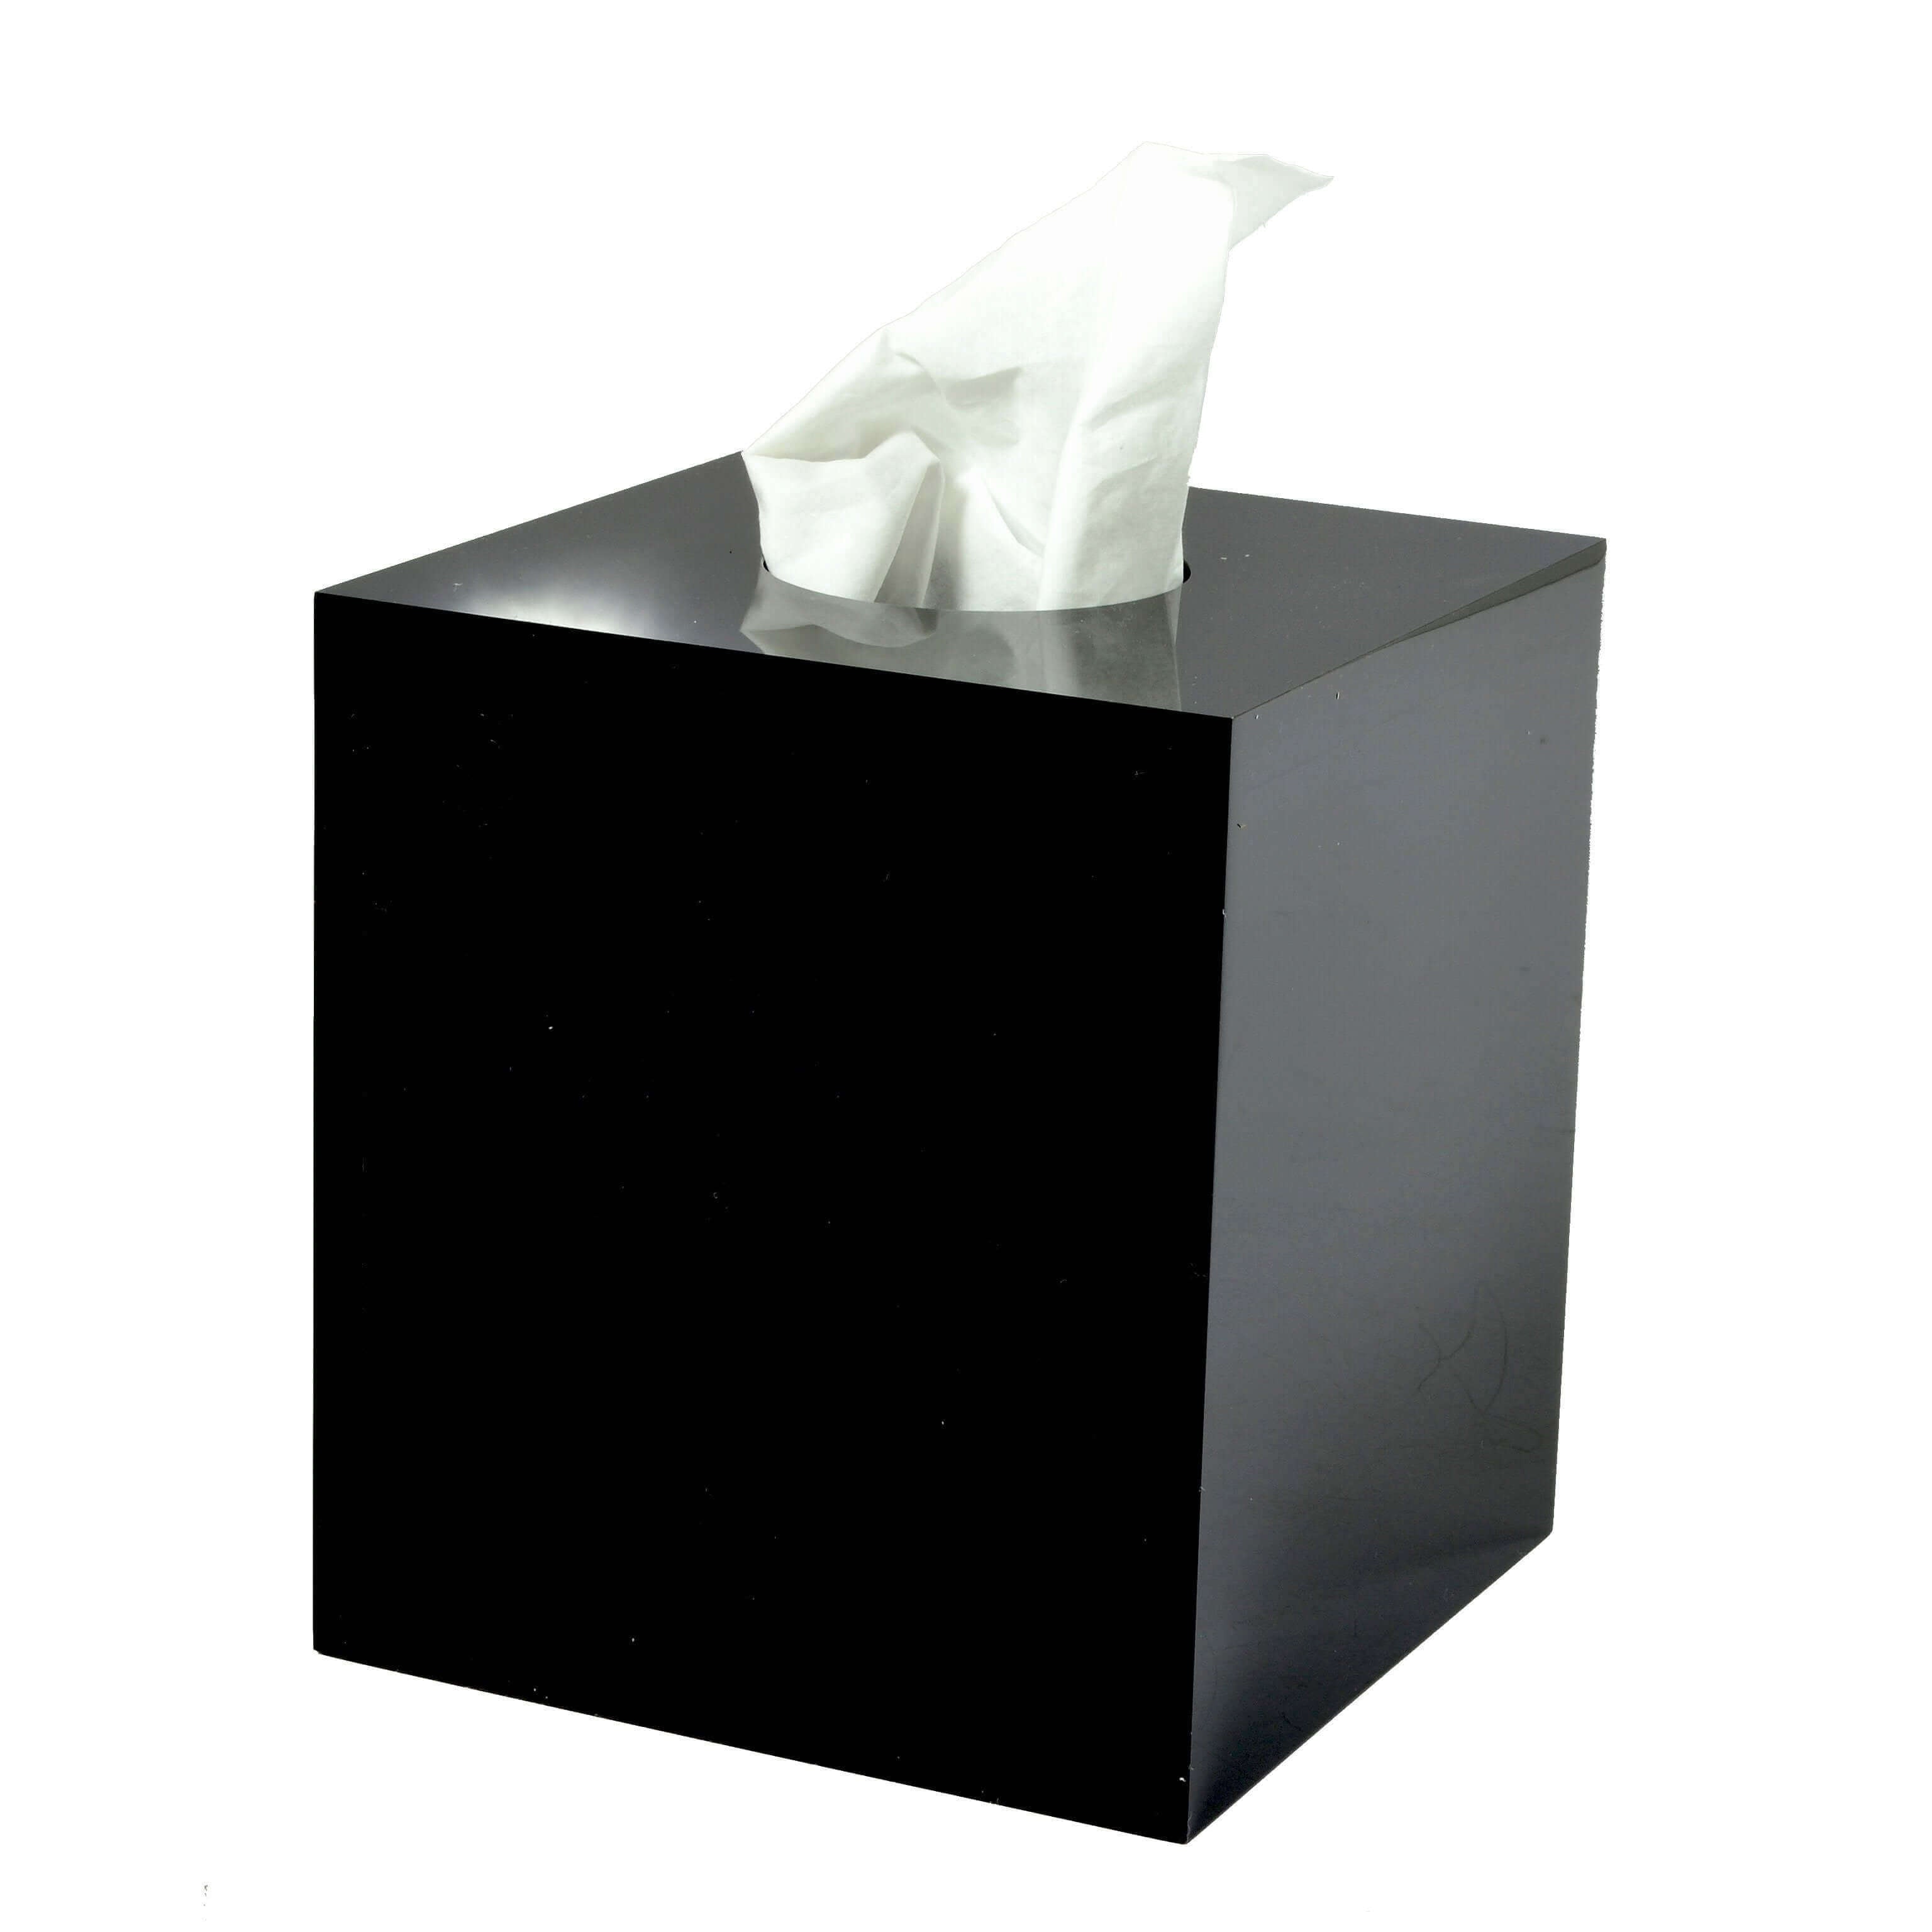 Mike + Ally - Ice Black Tissue boutique - 31560 - Black - 